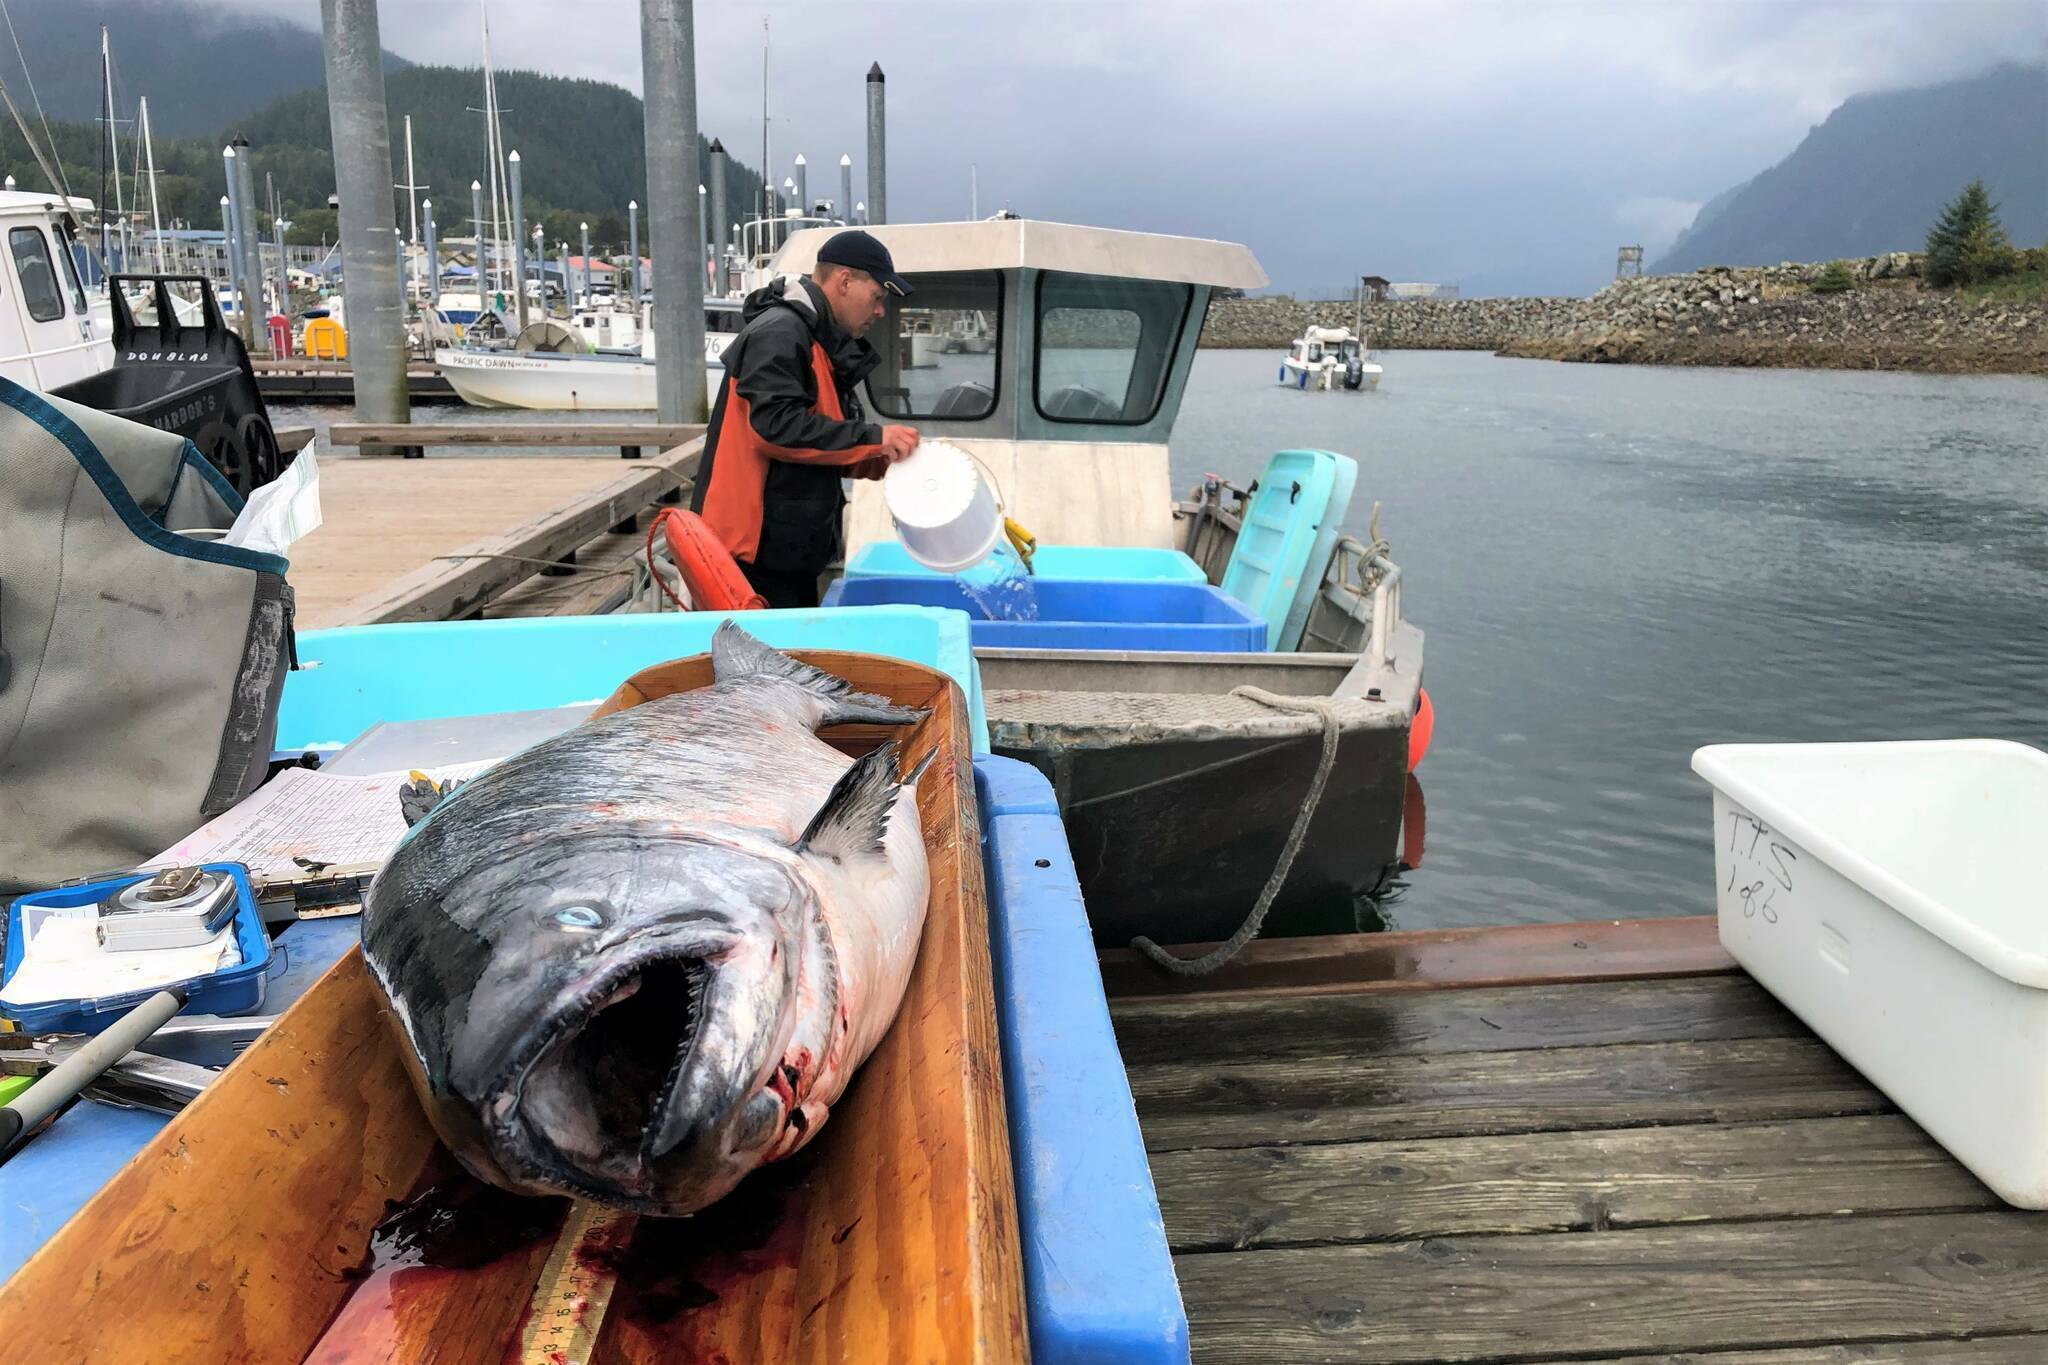 A king salmon is laid out for inspection by the Alaska Department of Fish and Game at the Mike Pusich Douglas Harbor during the Golden North Salmon Derby on Aug. 25, 2019. (Peter Segall / Juneau Empire file photo)